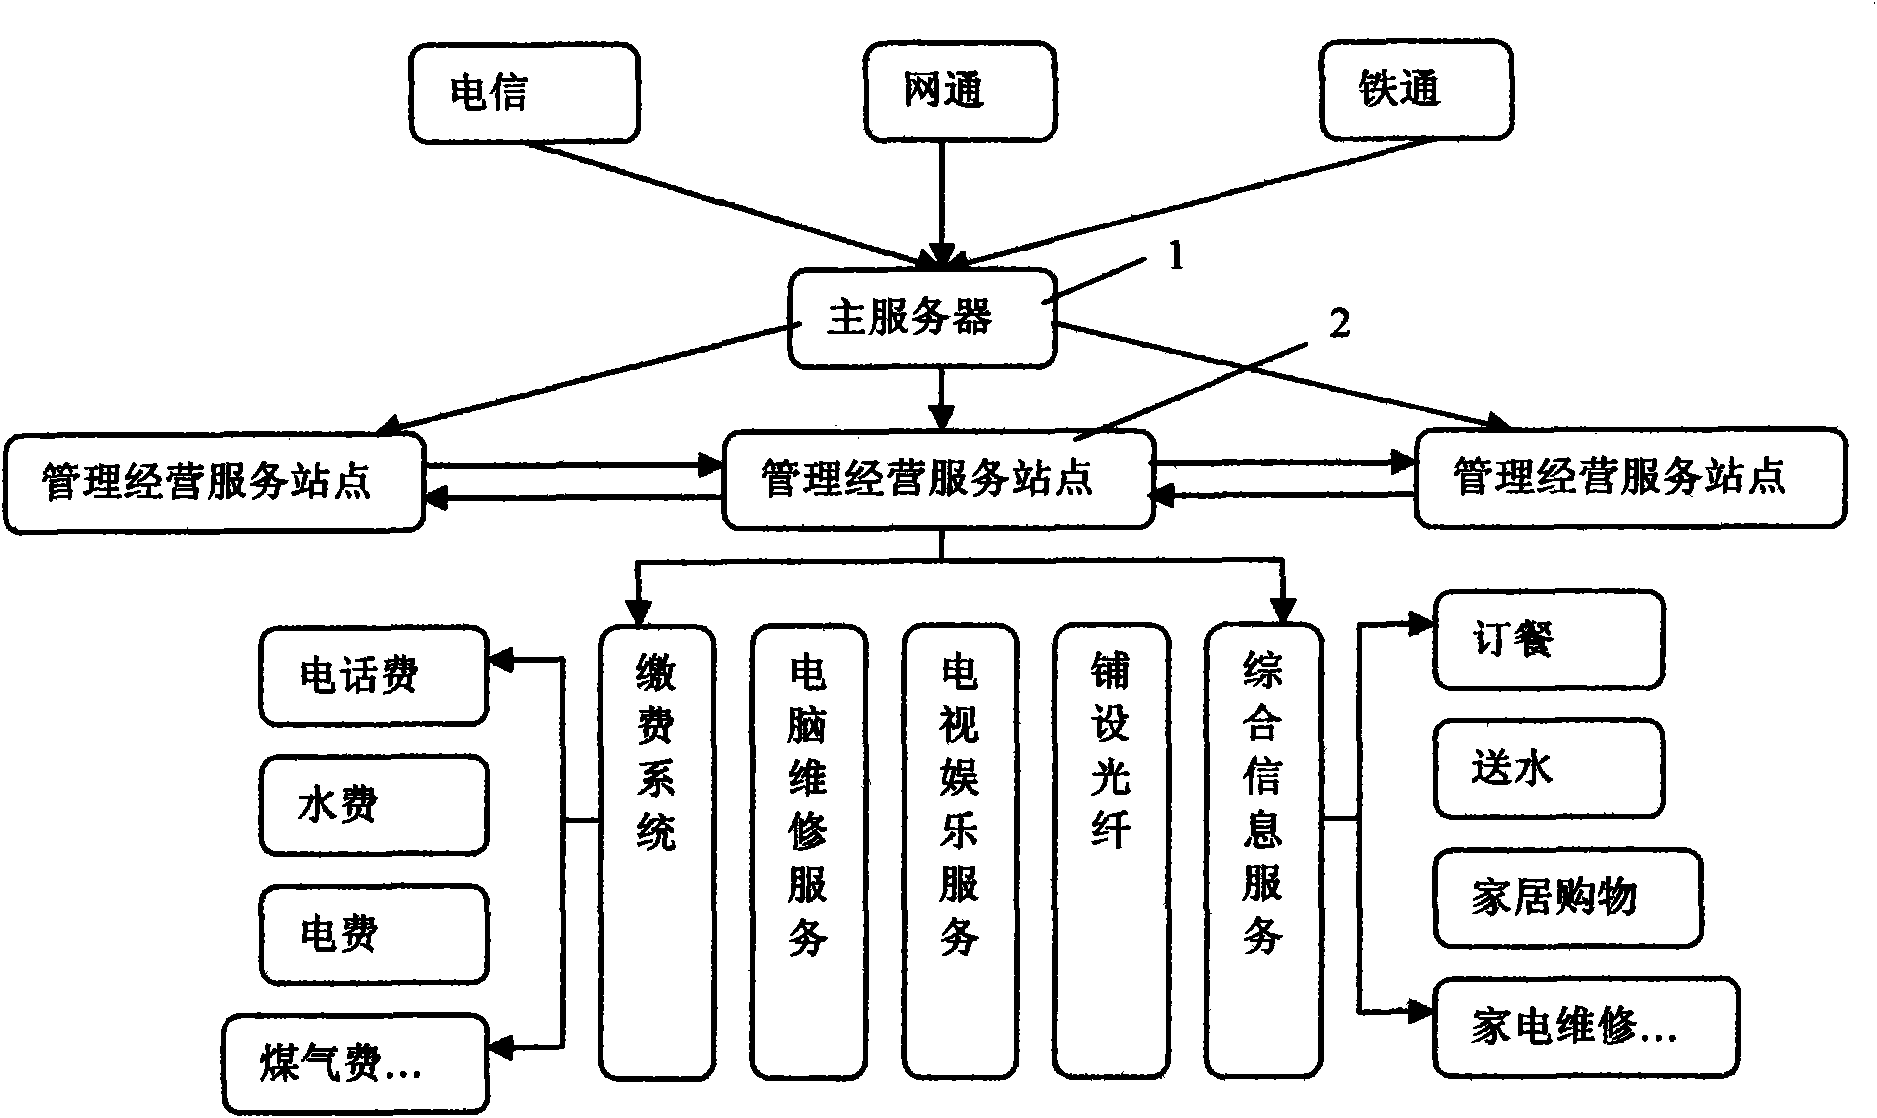 Local area network (LAN) community service operation system